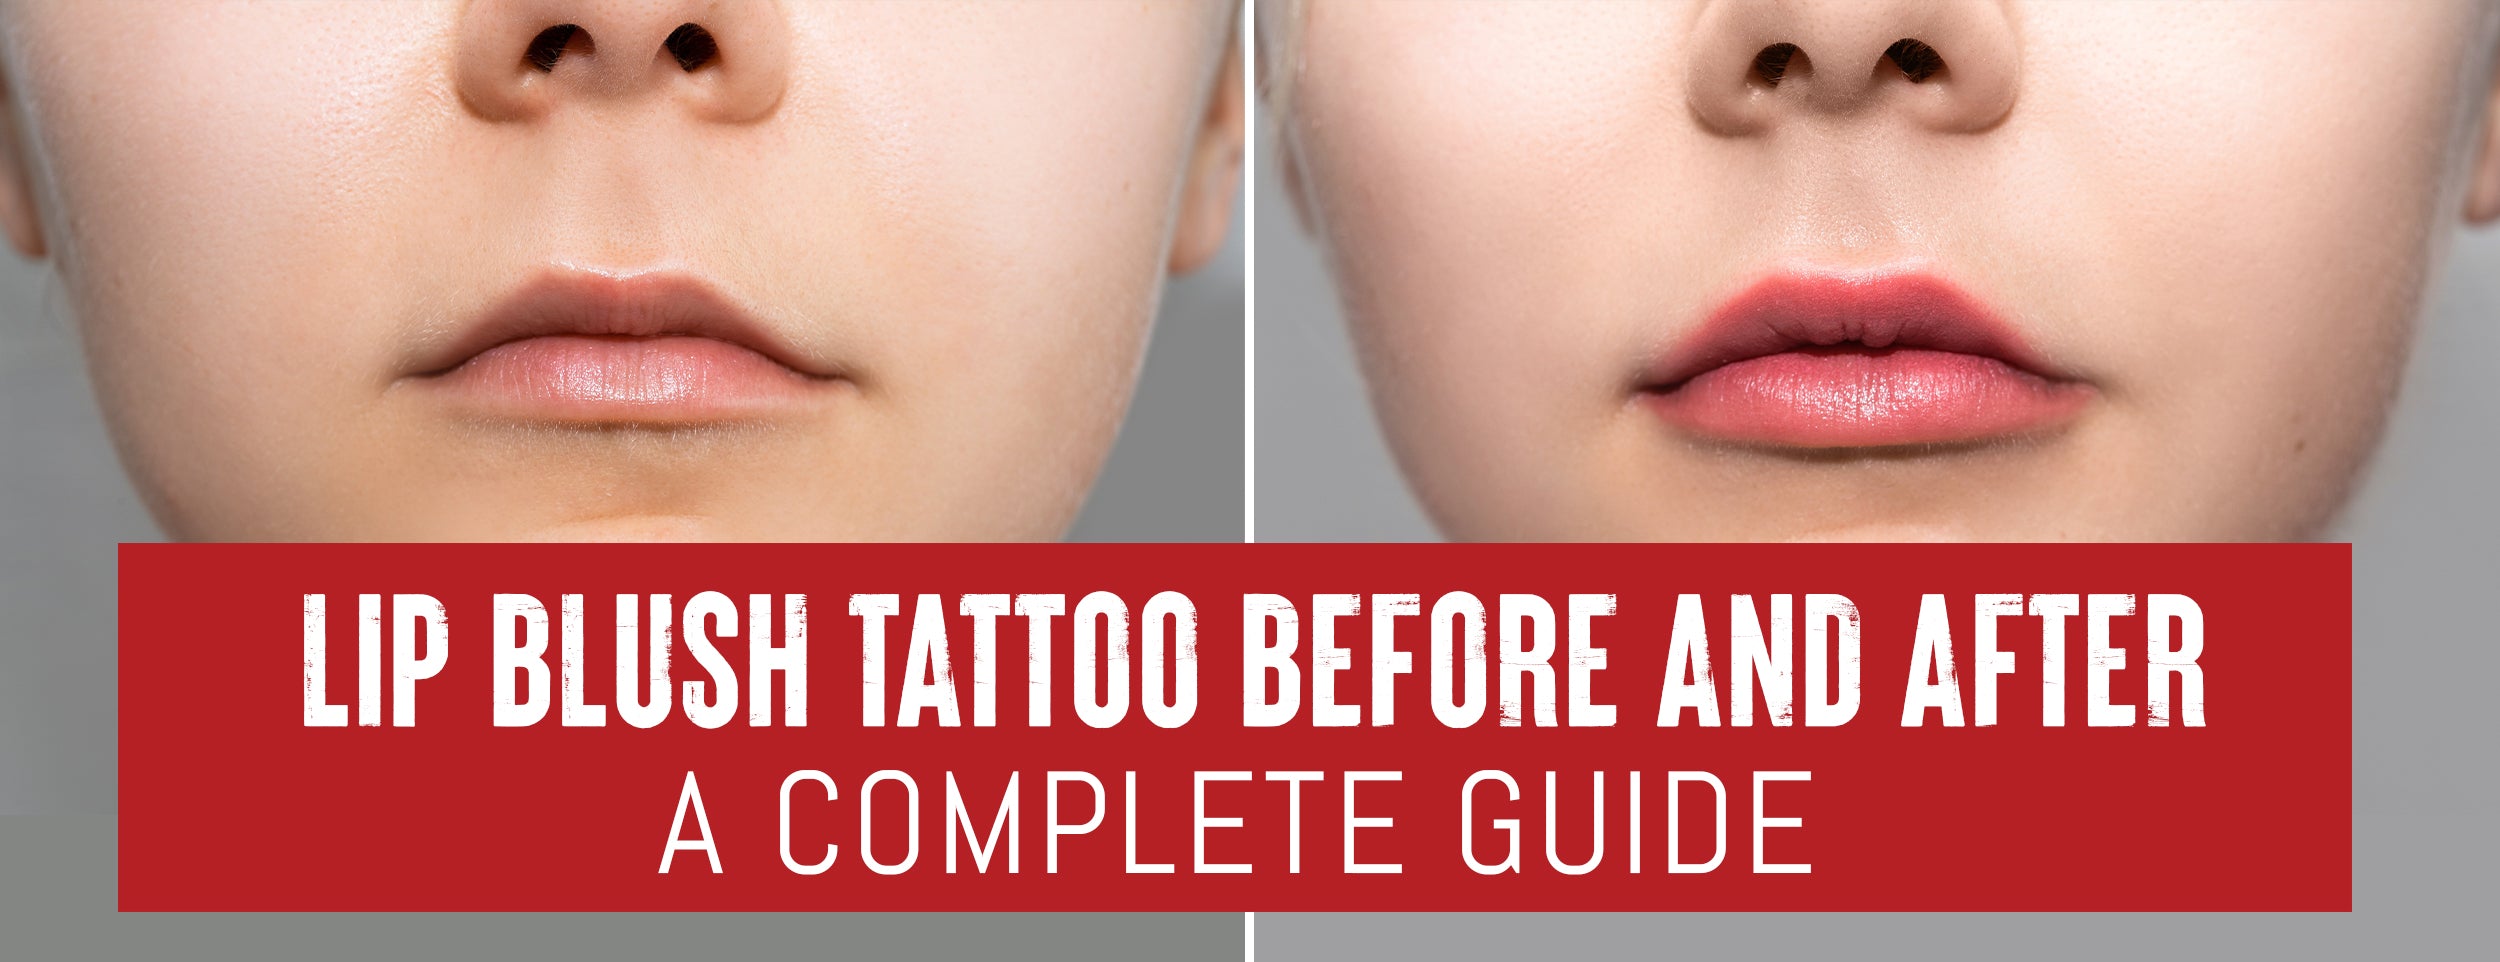 The Before and After of Lip Blush Tattoos